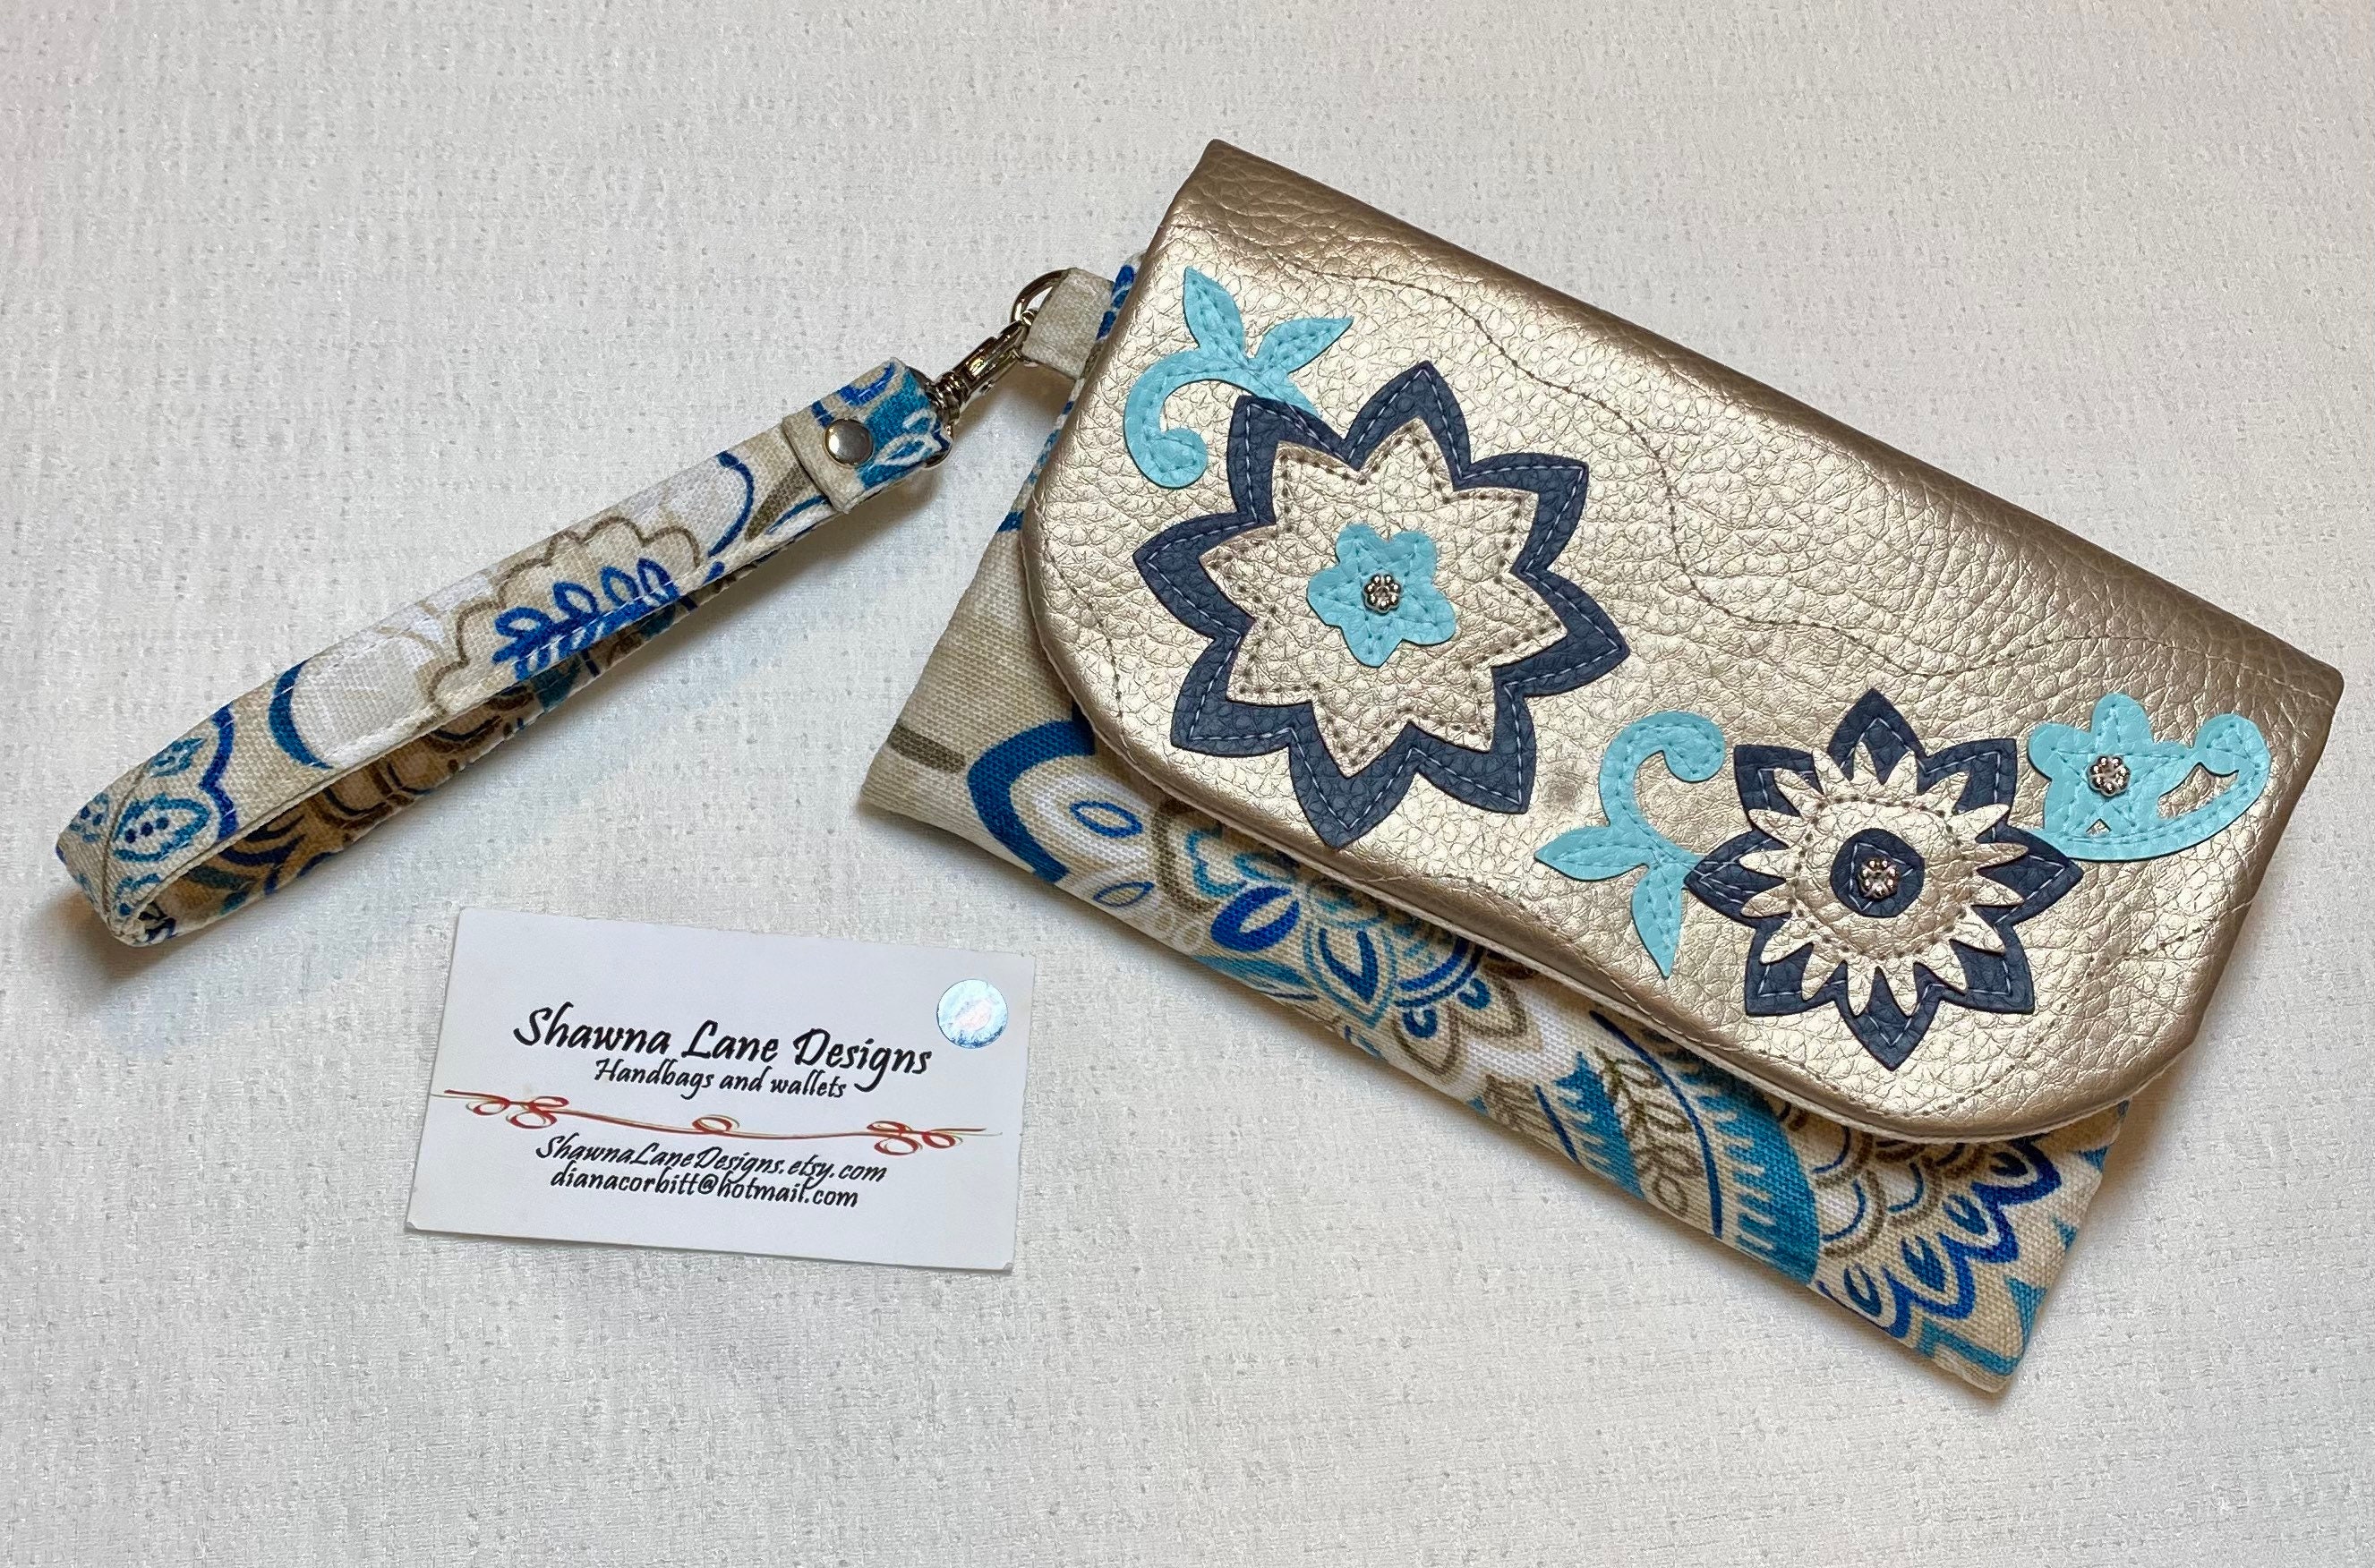 cell phone wallet fabric wallet women's wallet blue floral canvas fabric wristlet wallet small purse handmade wallet